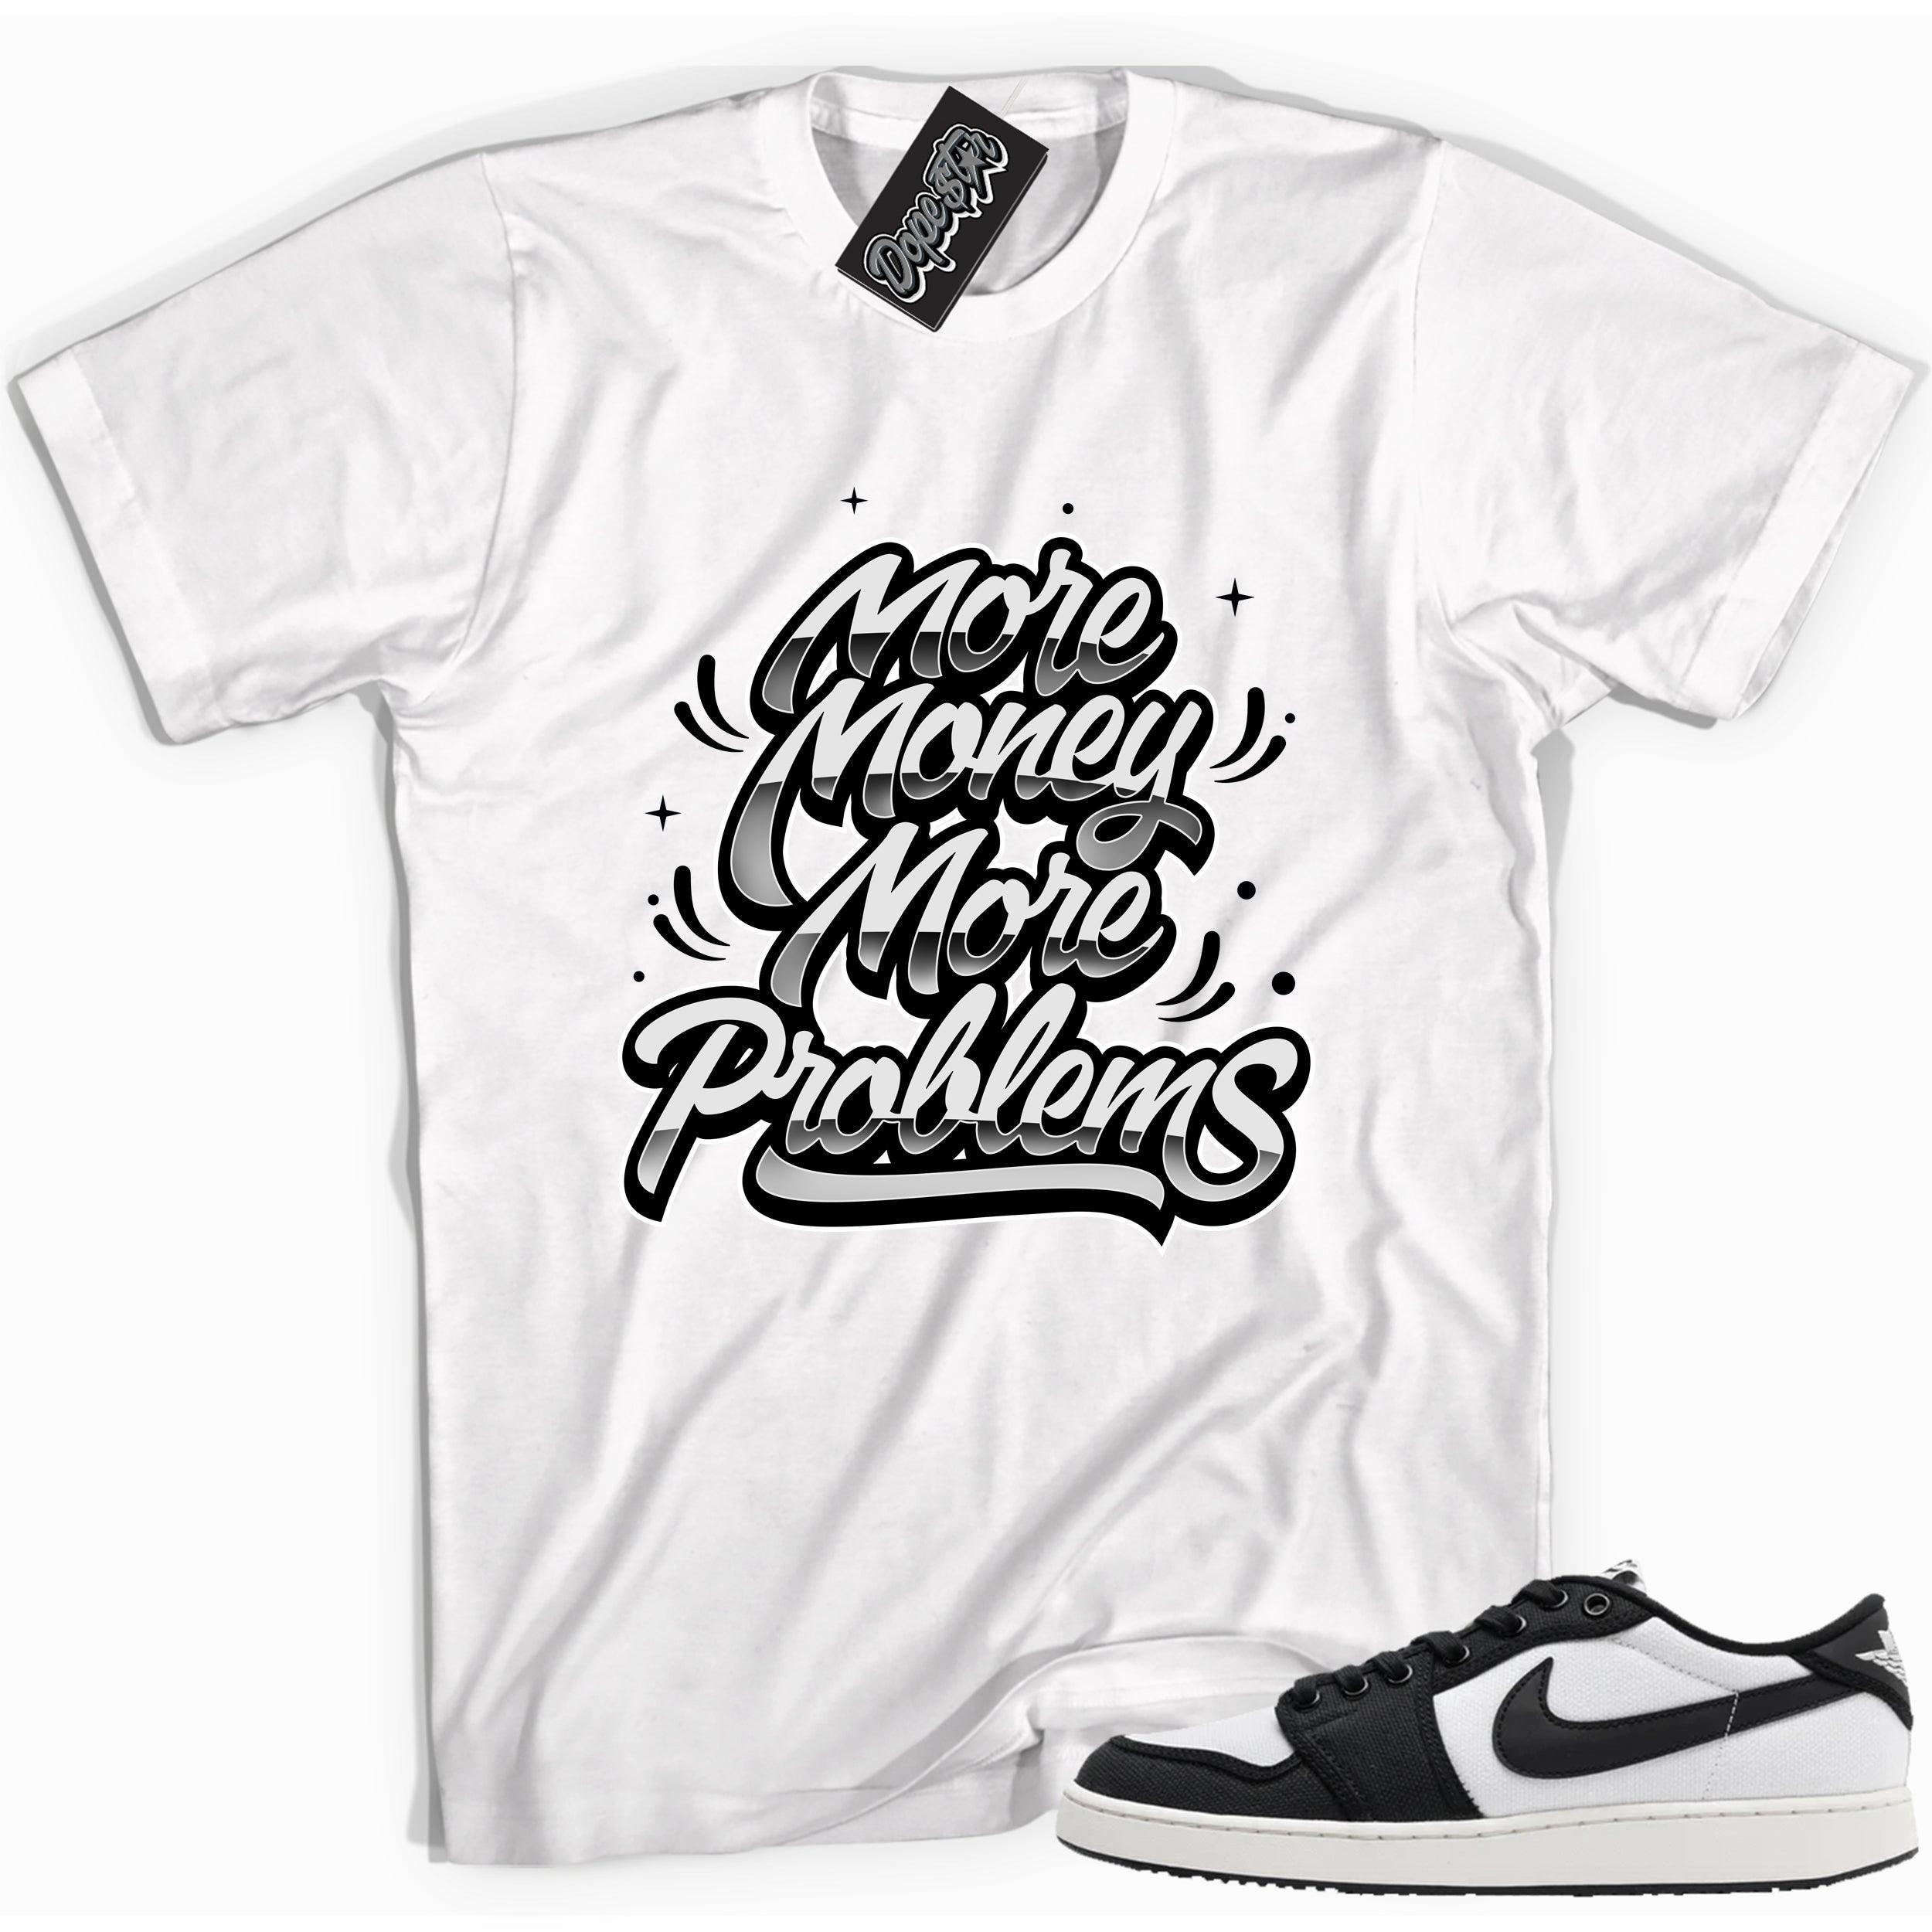 Cool white graphic tee with 'more money more problems' print, that perfectly matches Air Jordan 1 Retro Ajko Low Black & White sneakers.